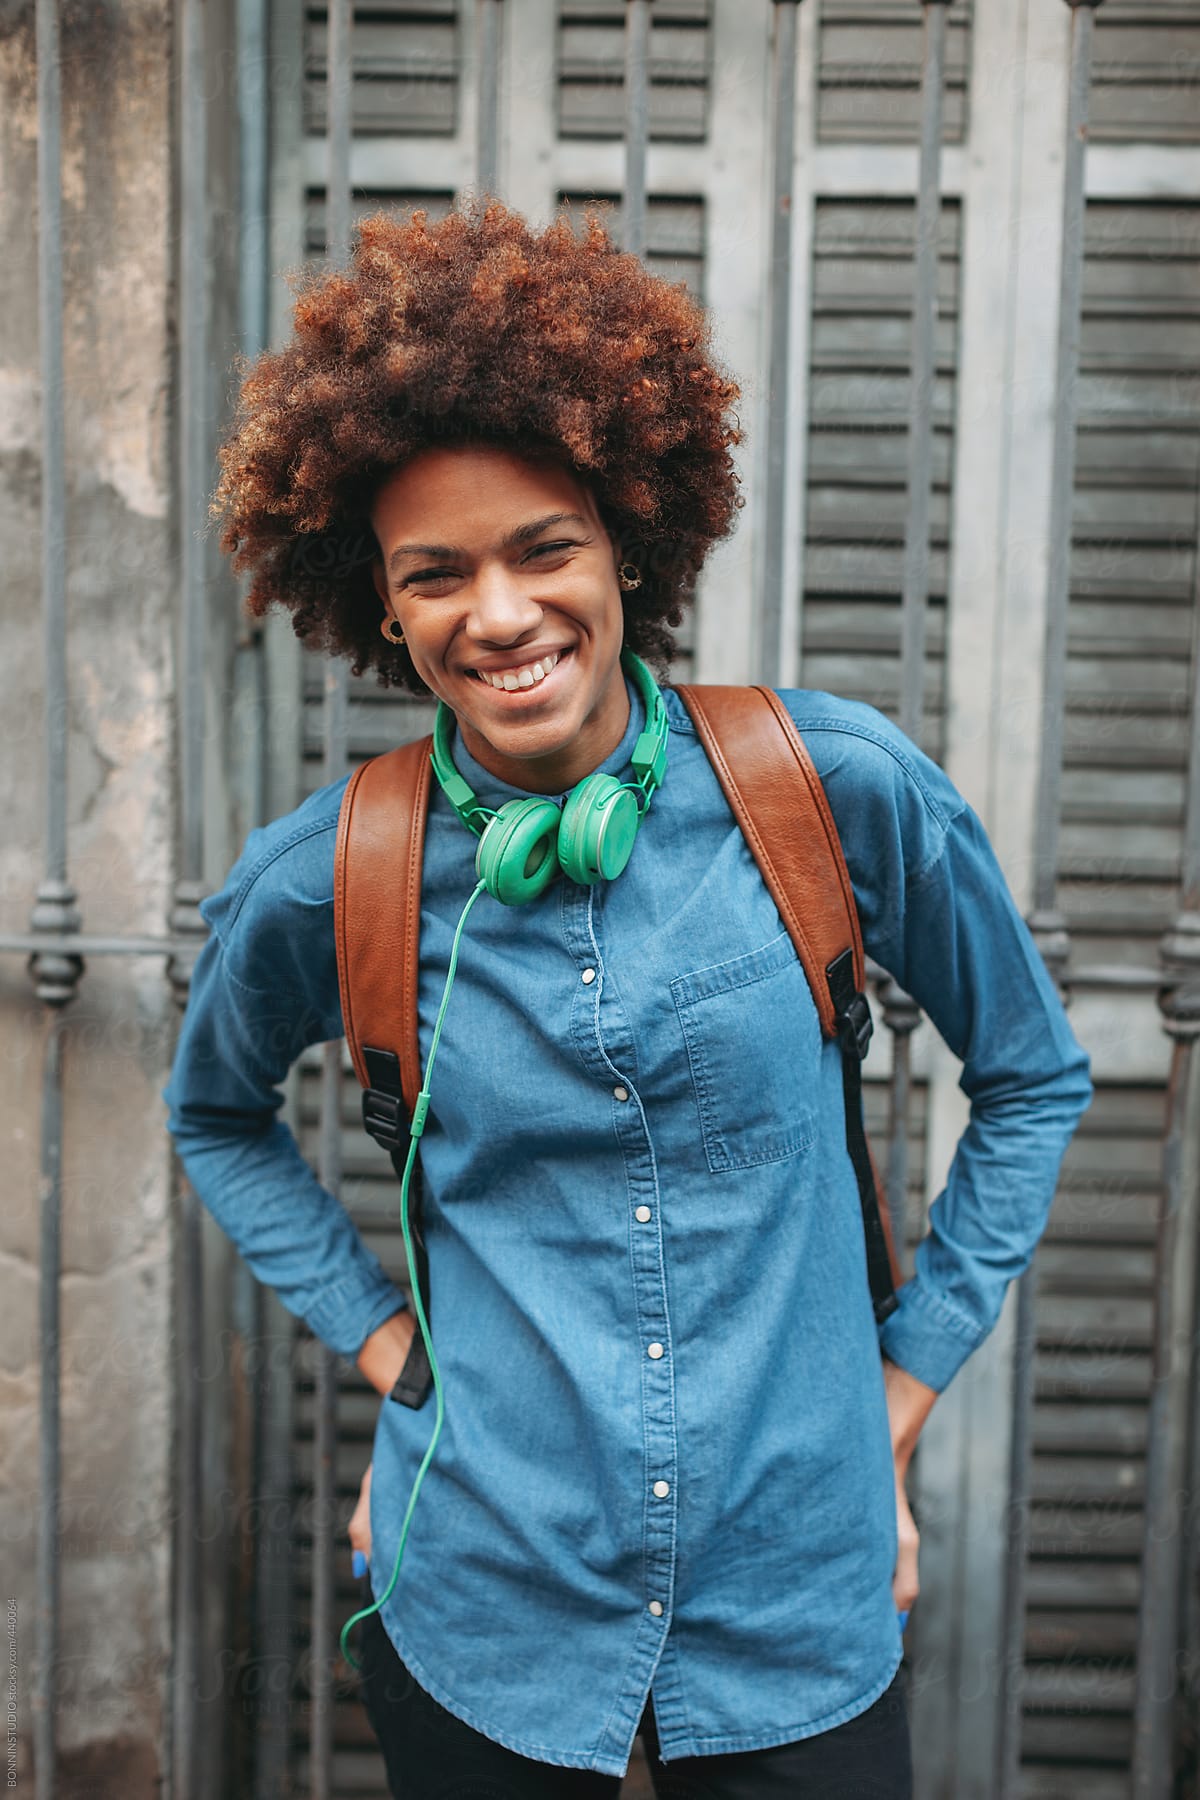 Afro american woman with leather backpack and green headphones smiling in outdoors.